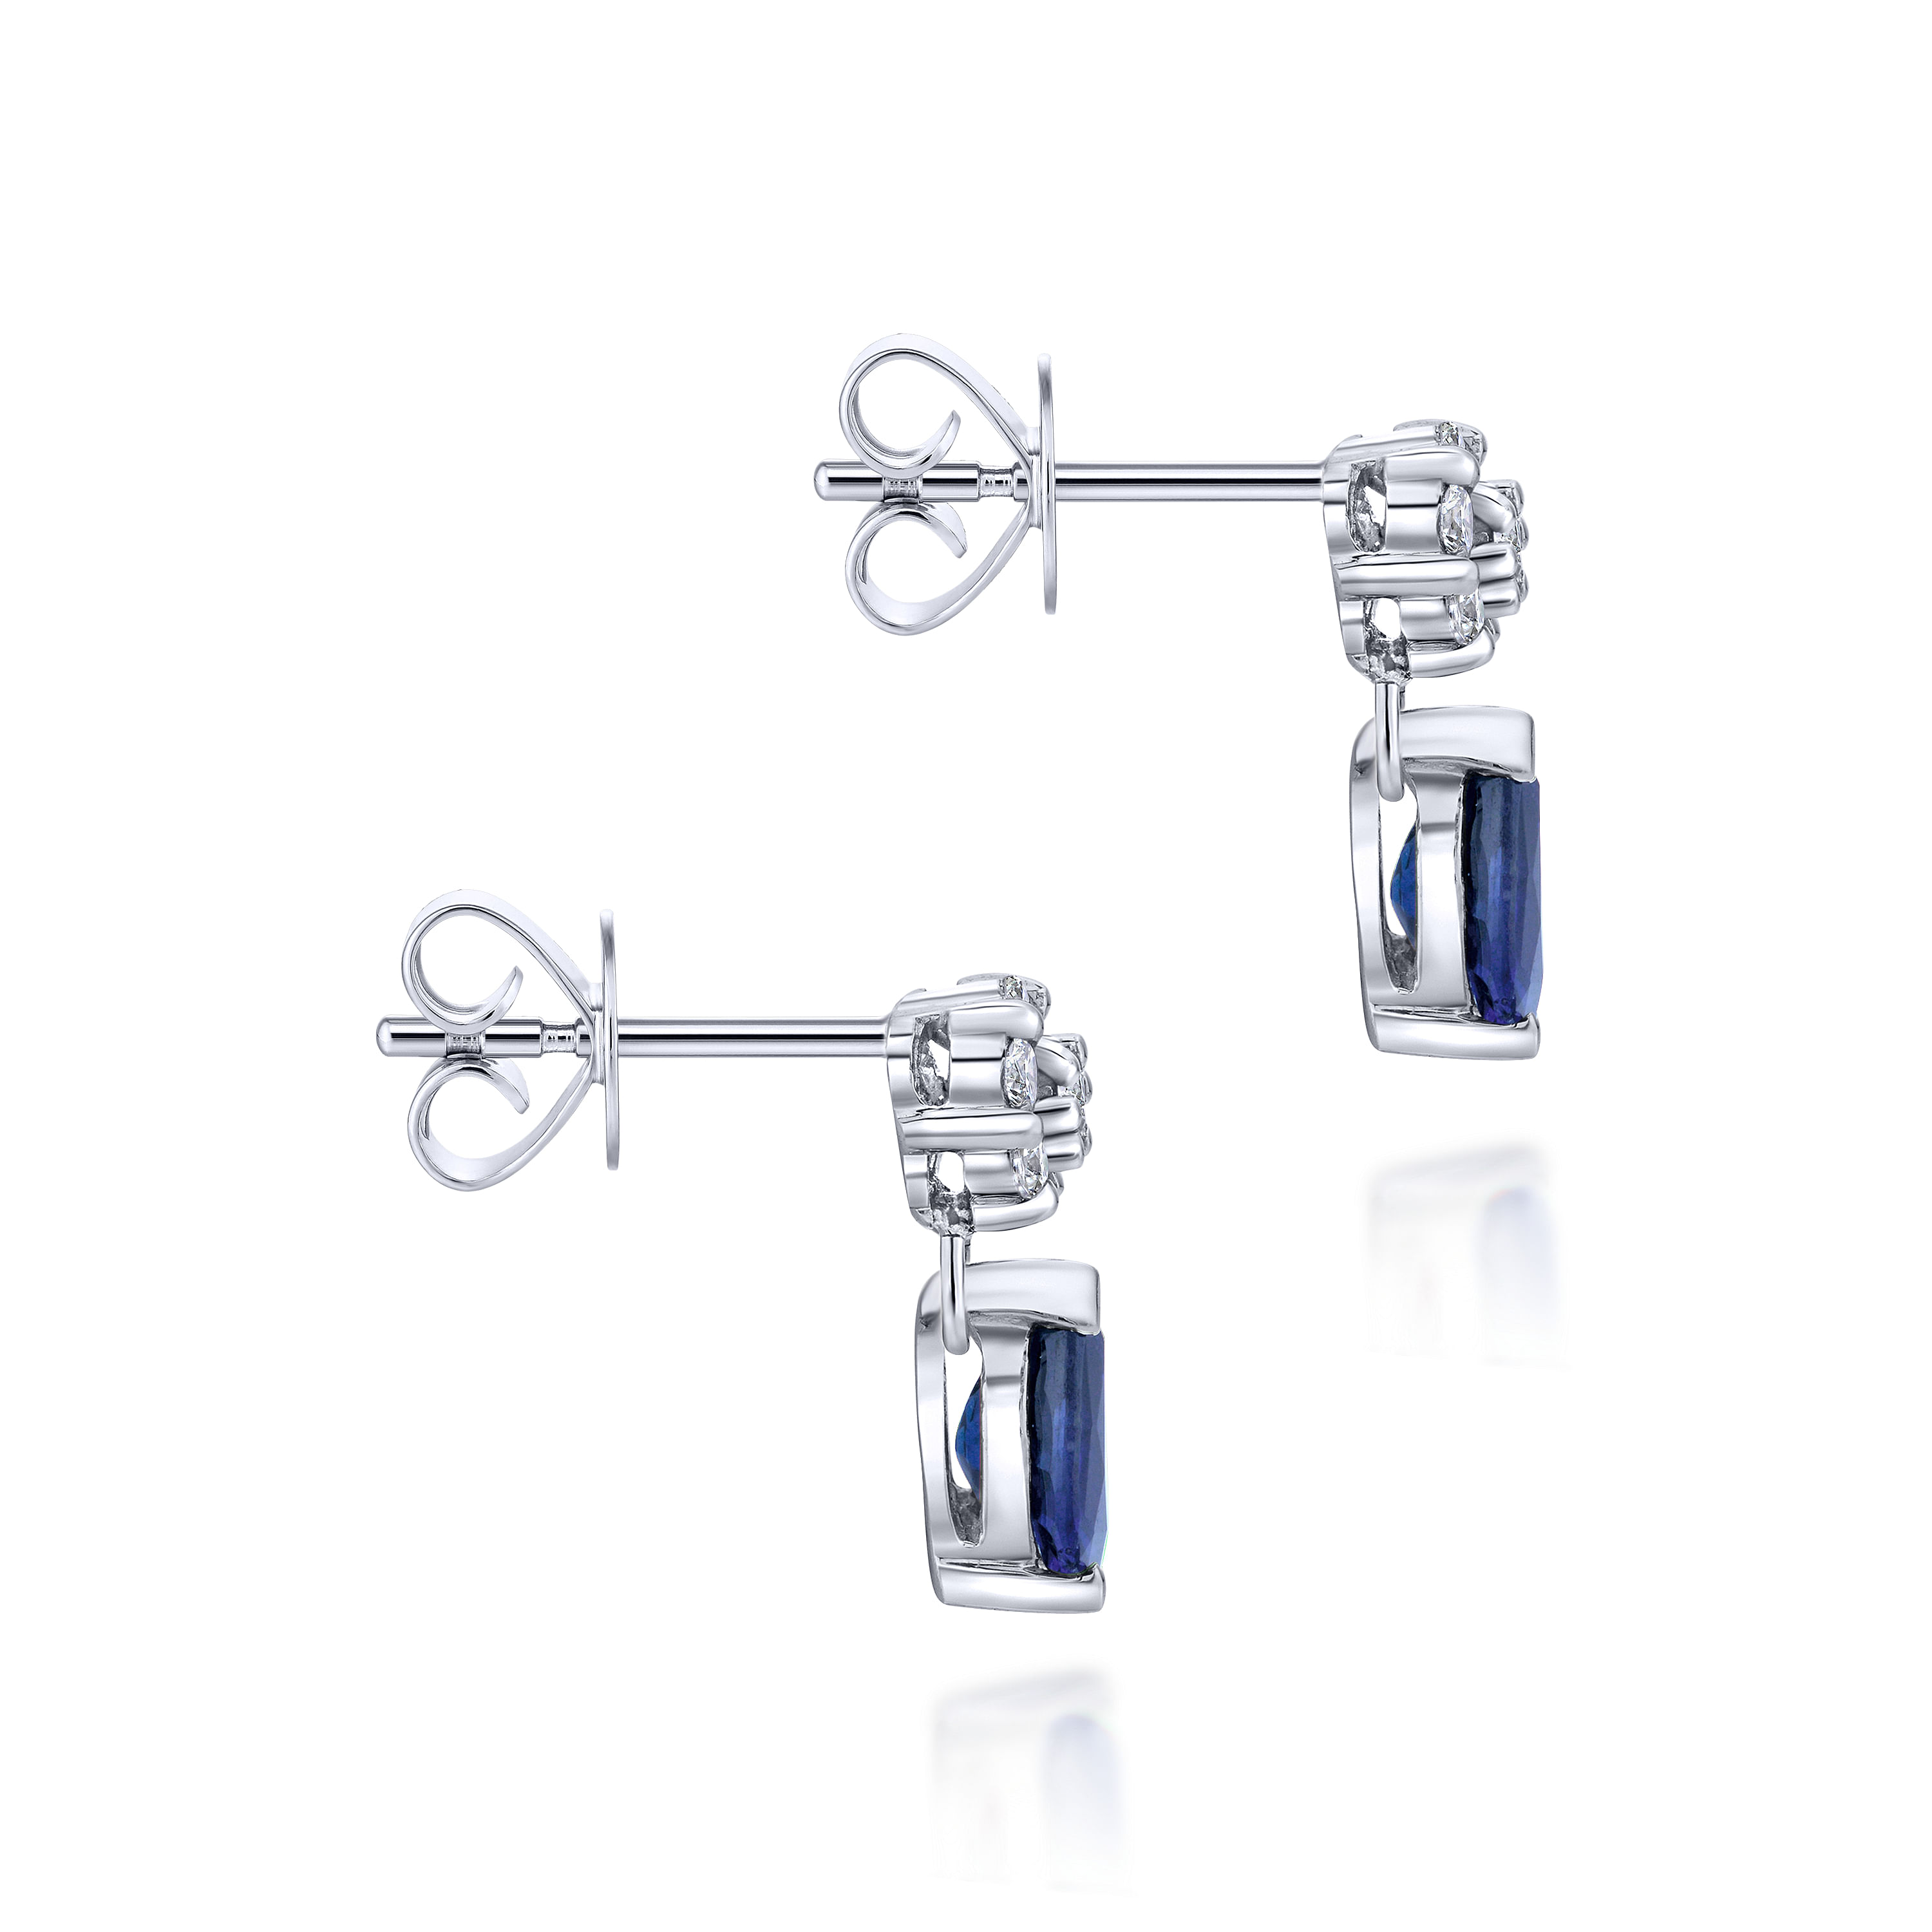 14K White Gold Floral Diamond Stud Earrings with Pear Shaped Sapphire Drops - 0.14 ct - Shot 3